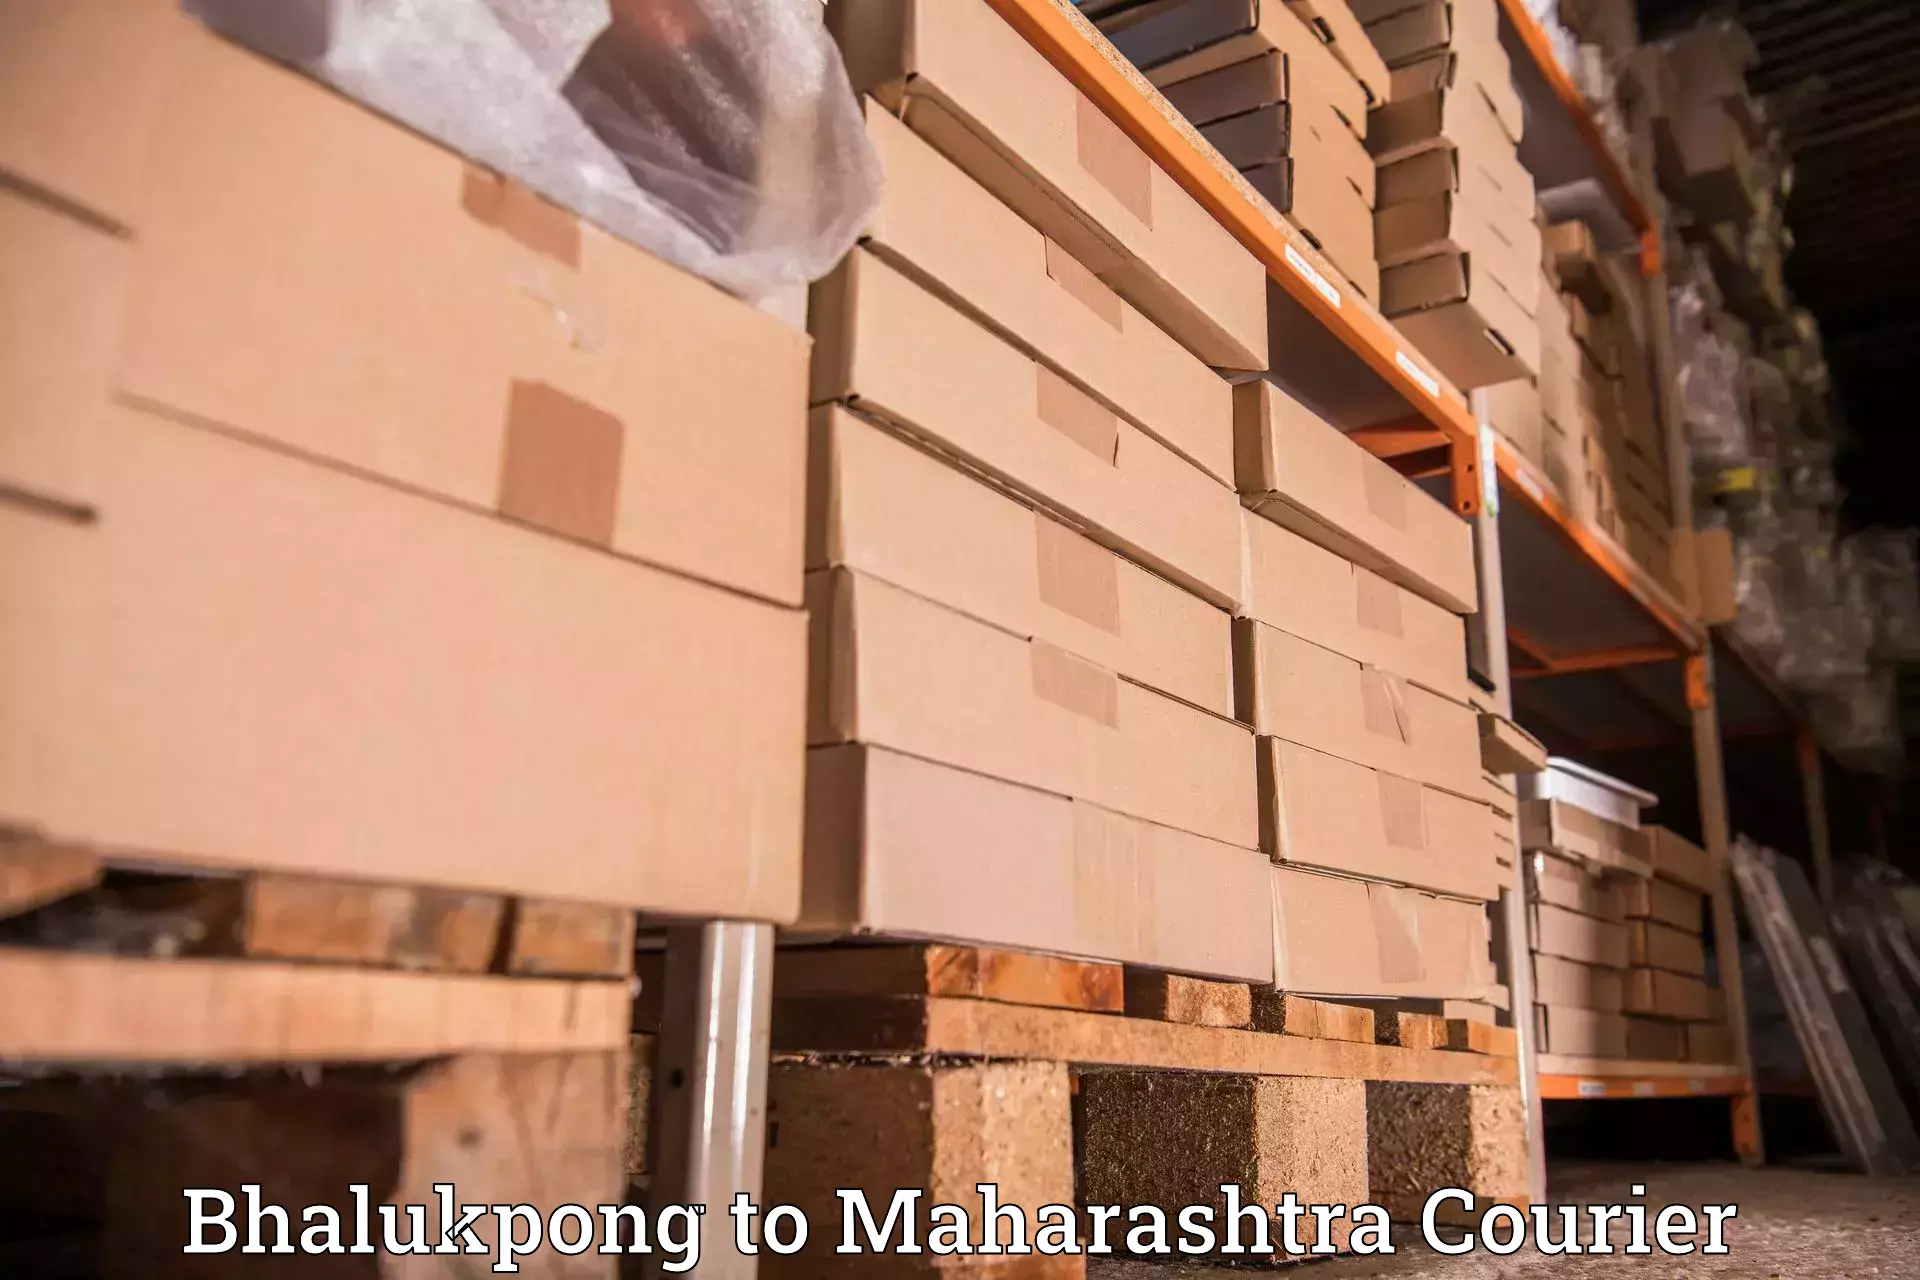 Courier service innovation Bhalukpong to Shrirampur